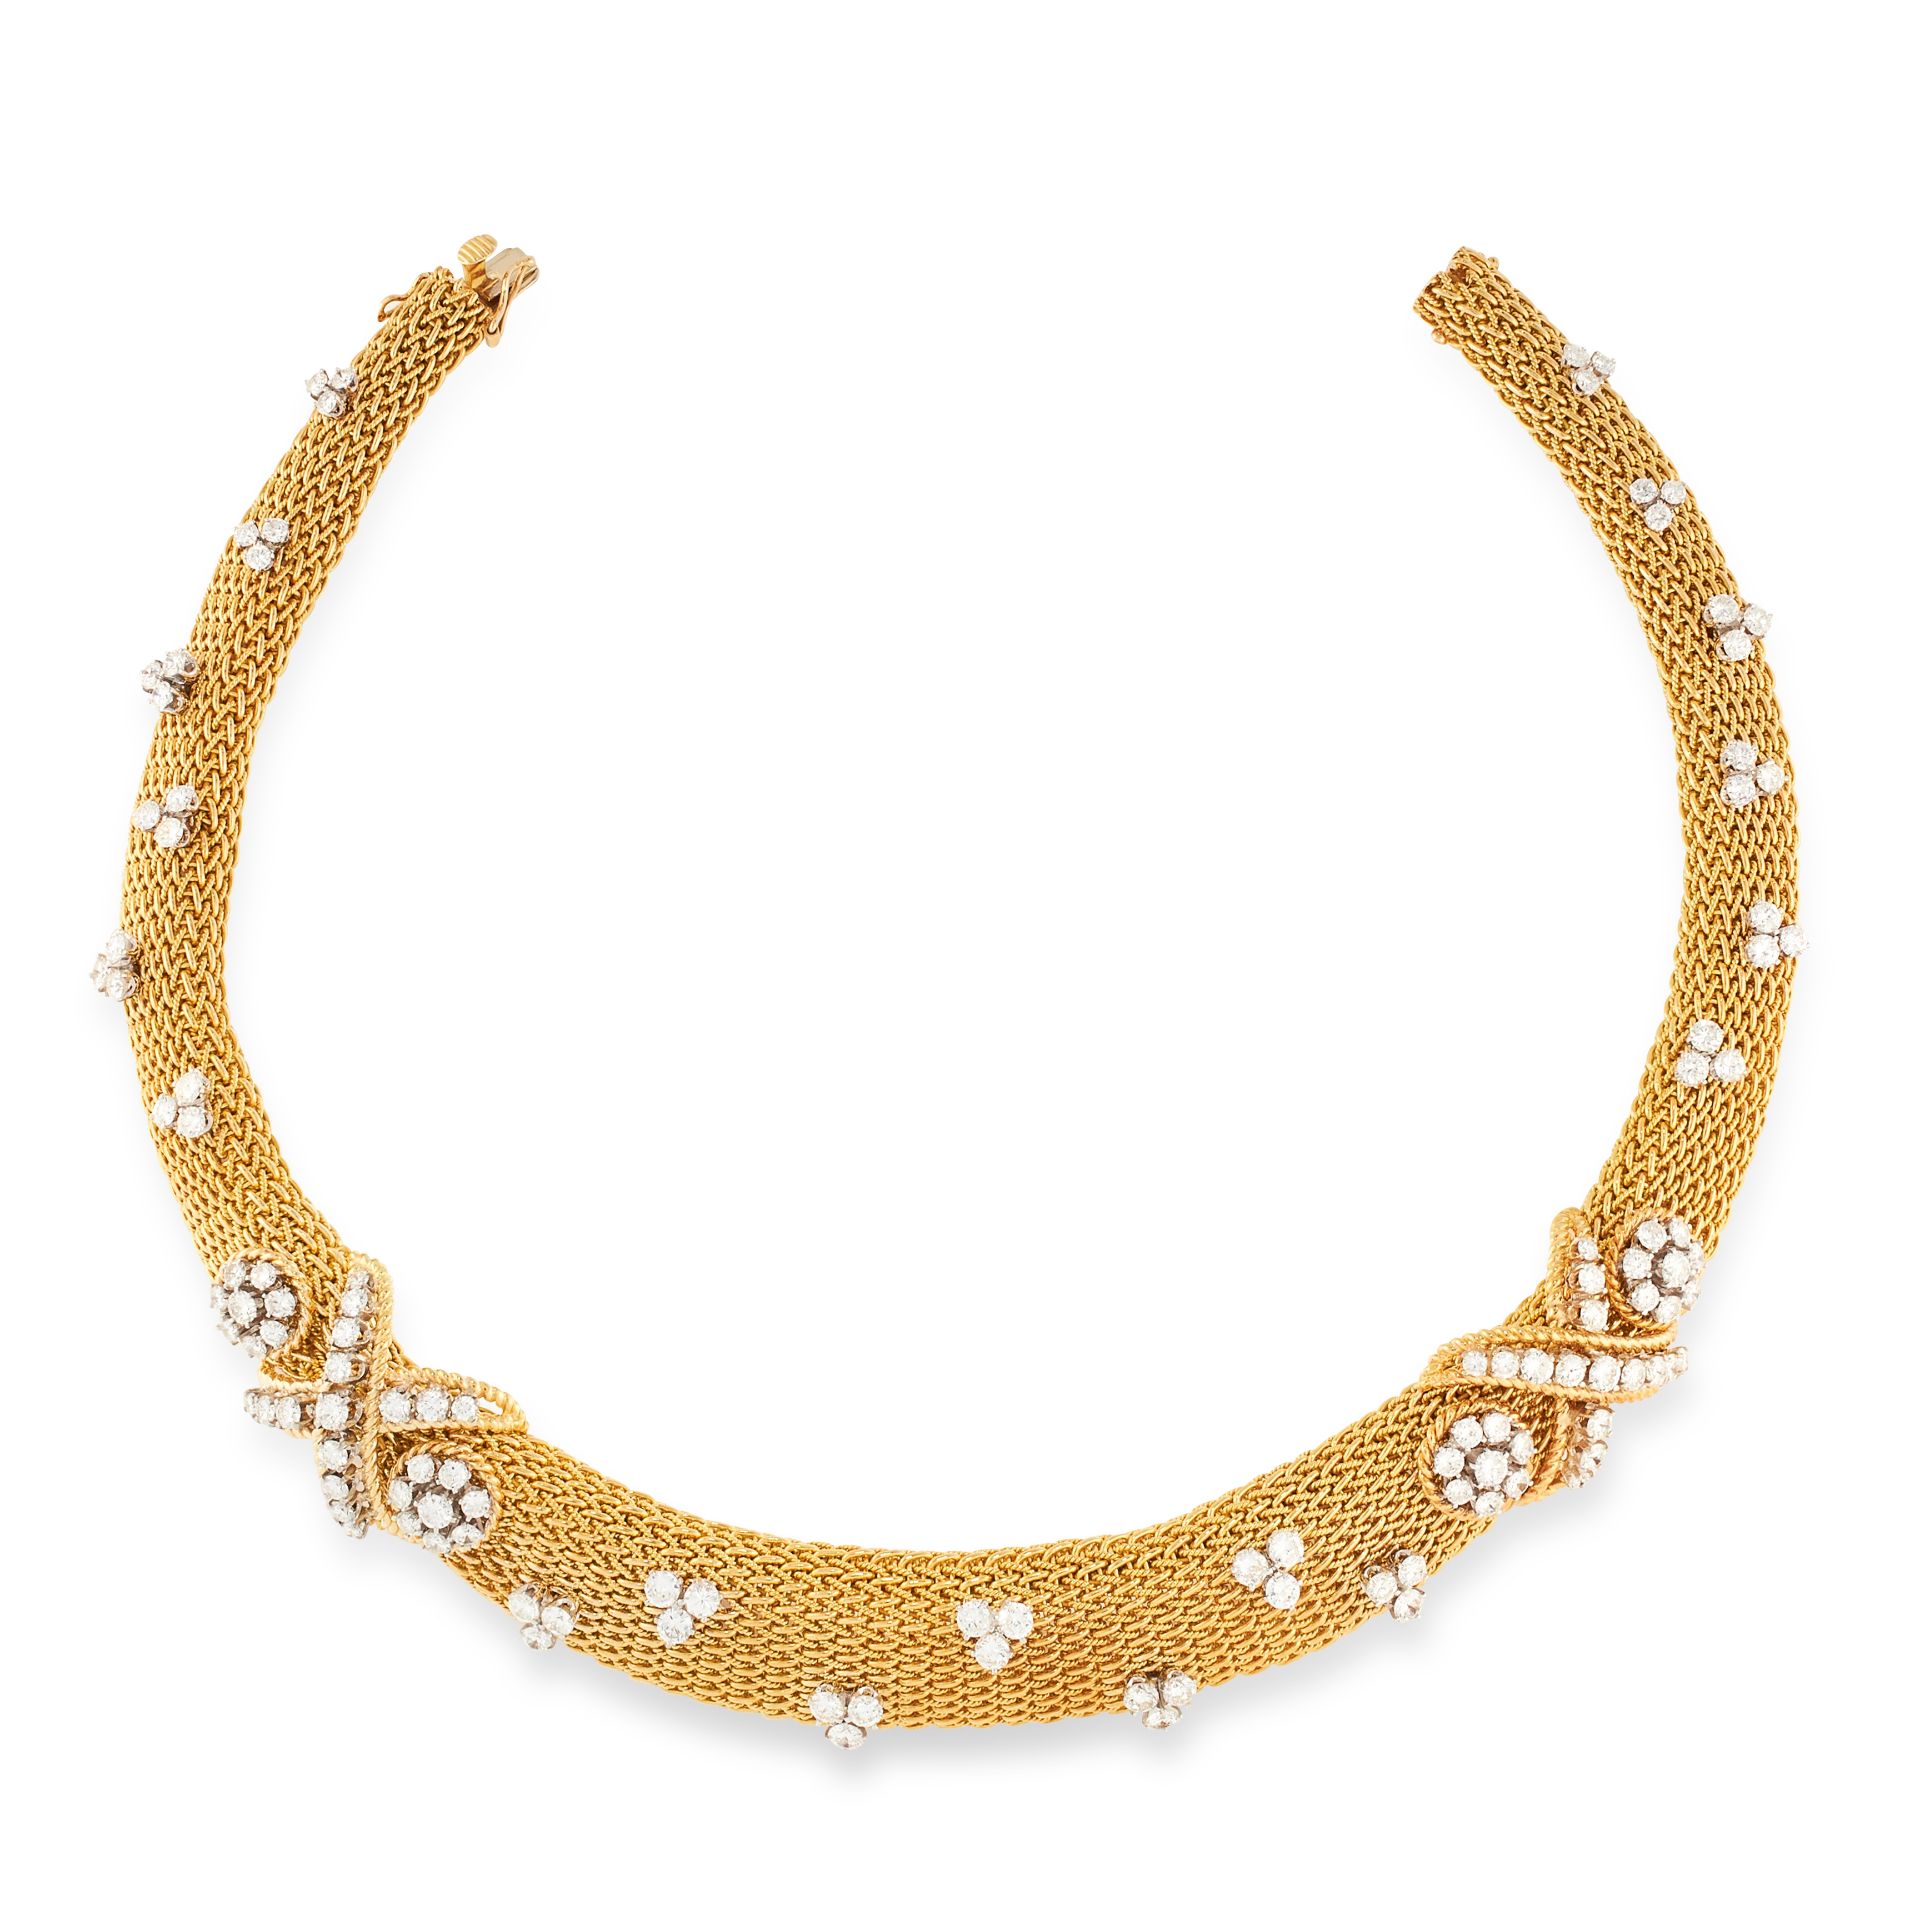 A VINTAGE DIAMOND NECKLACE in 18ct yellow gold, the tapering, articulated body formed of woven - Bild 2 aus 2